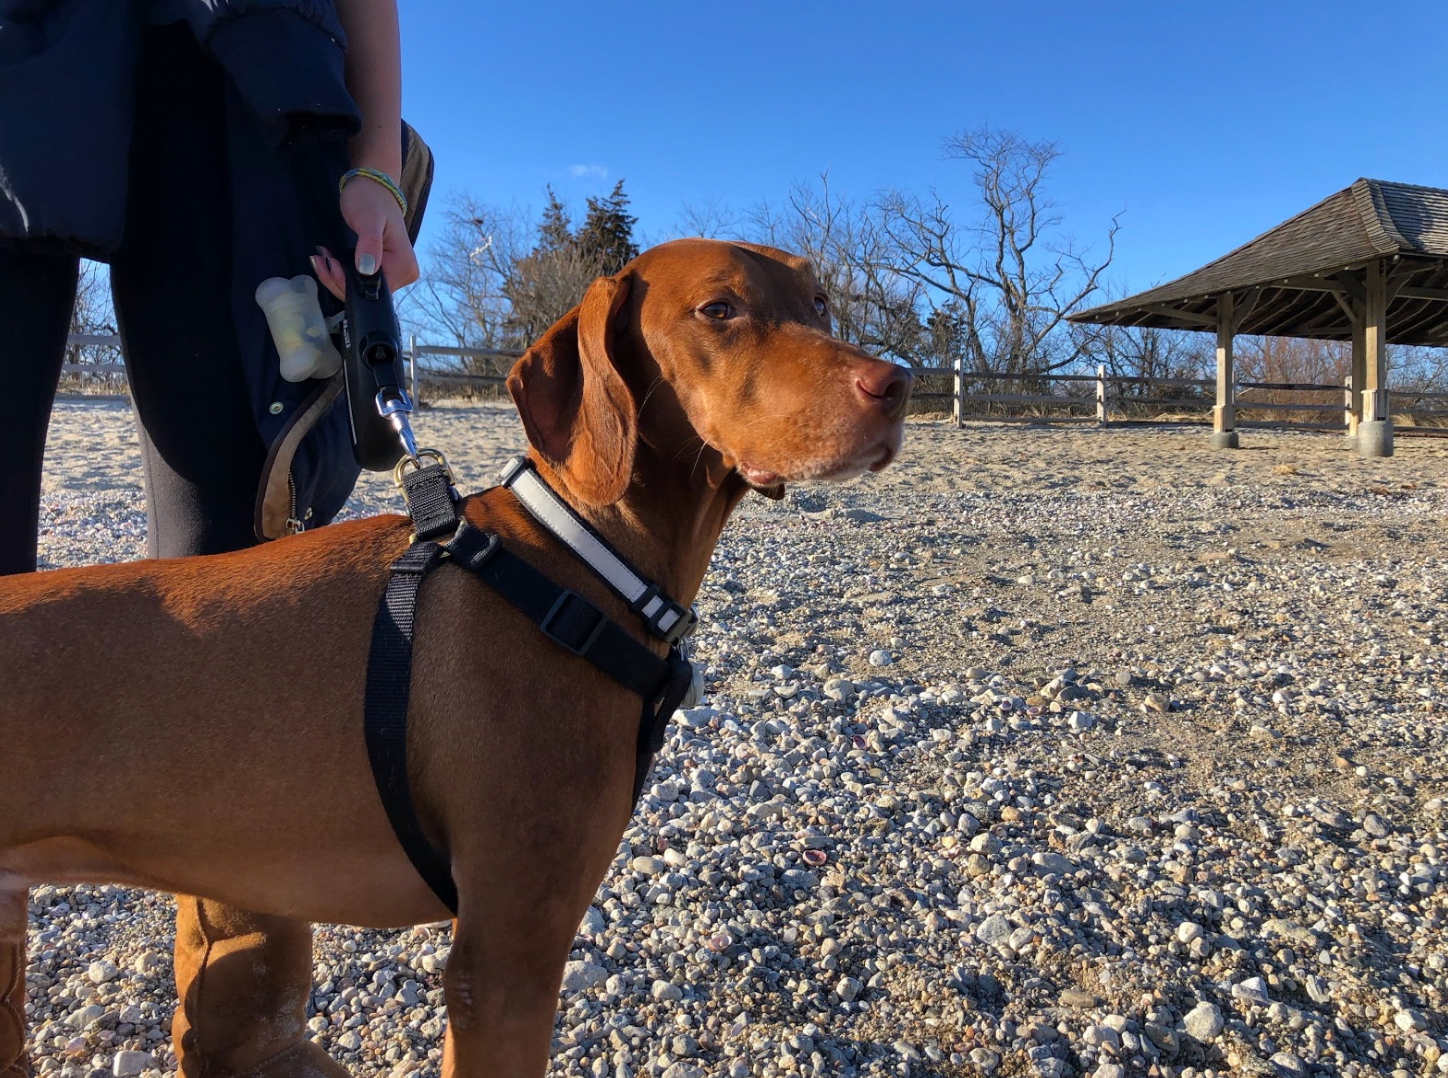 Scout the Vizsla stands by his owner as they watch a group of dogs playing a game of fetch. Dec 29, 2018 Photo: Avery Barakett